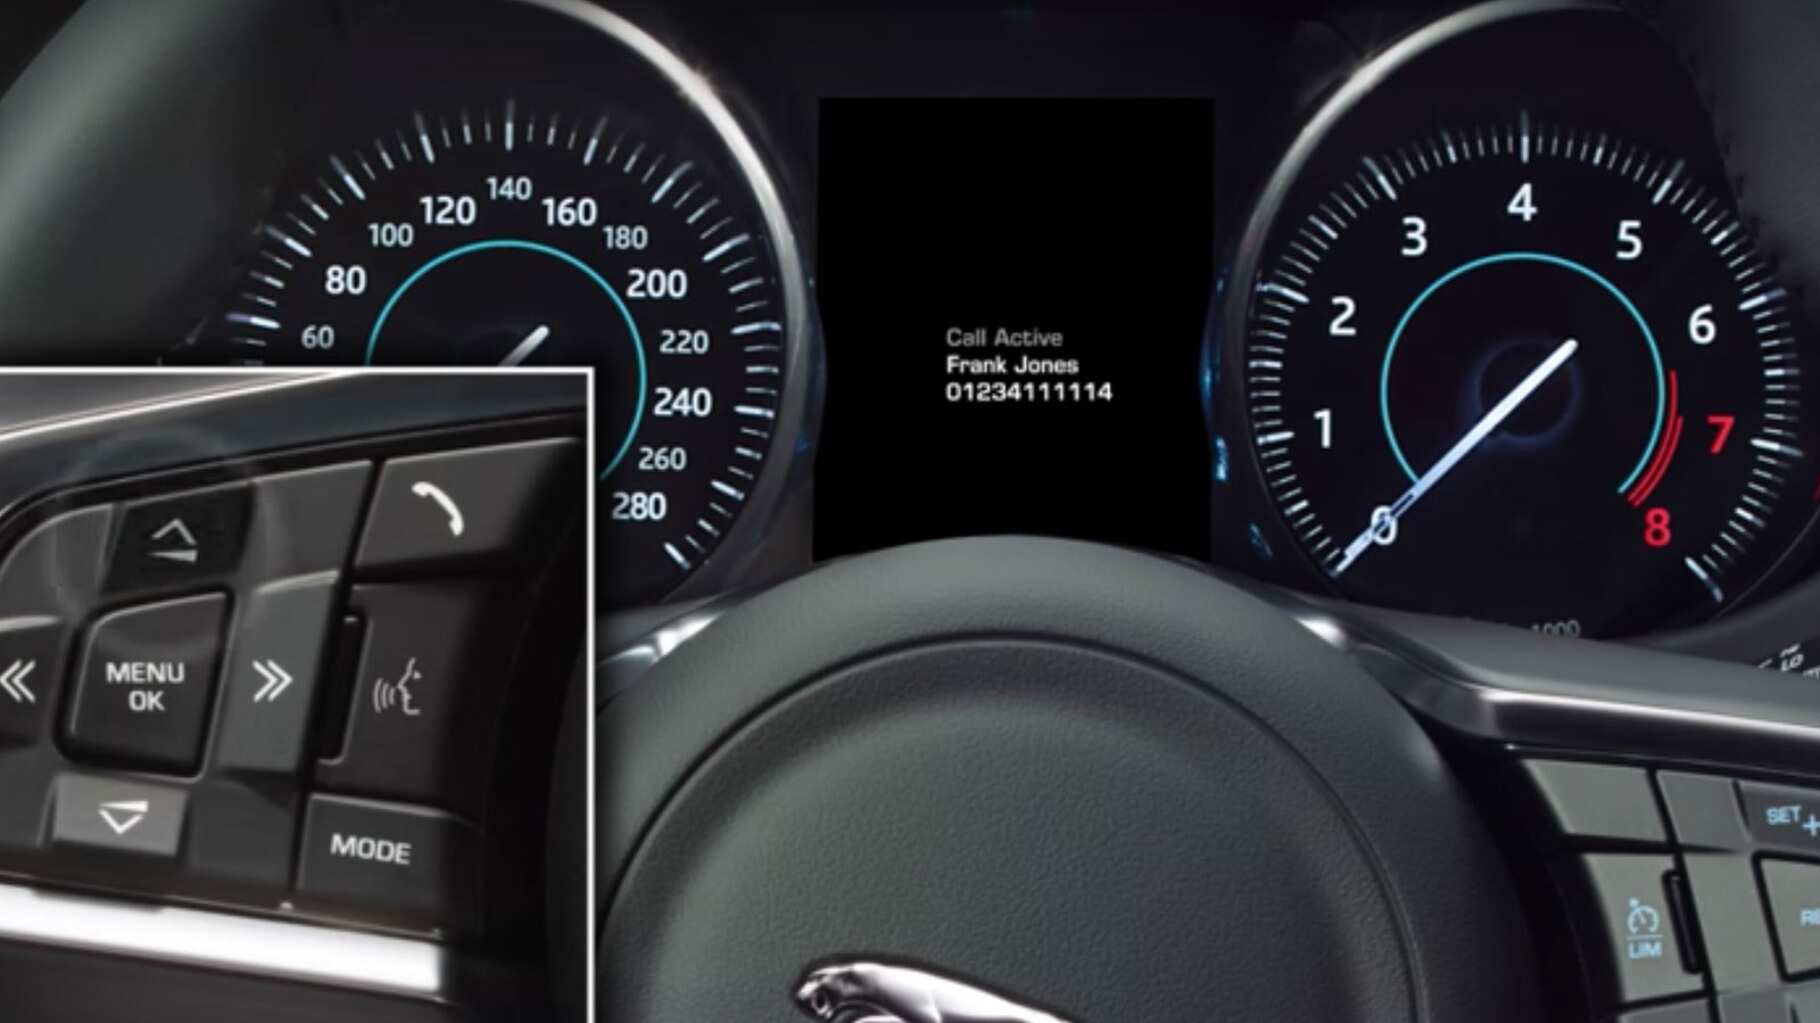 Jaguar F-Pace's InControl Touch: Steering Wheel Controls information video.